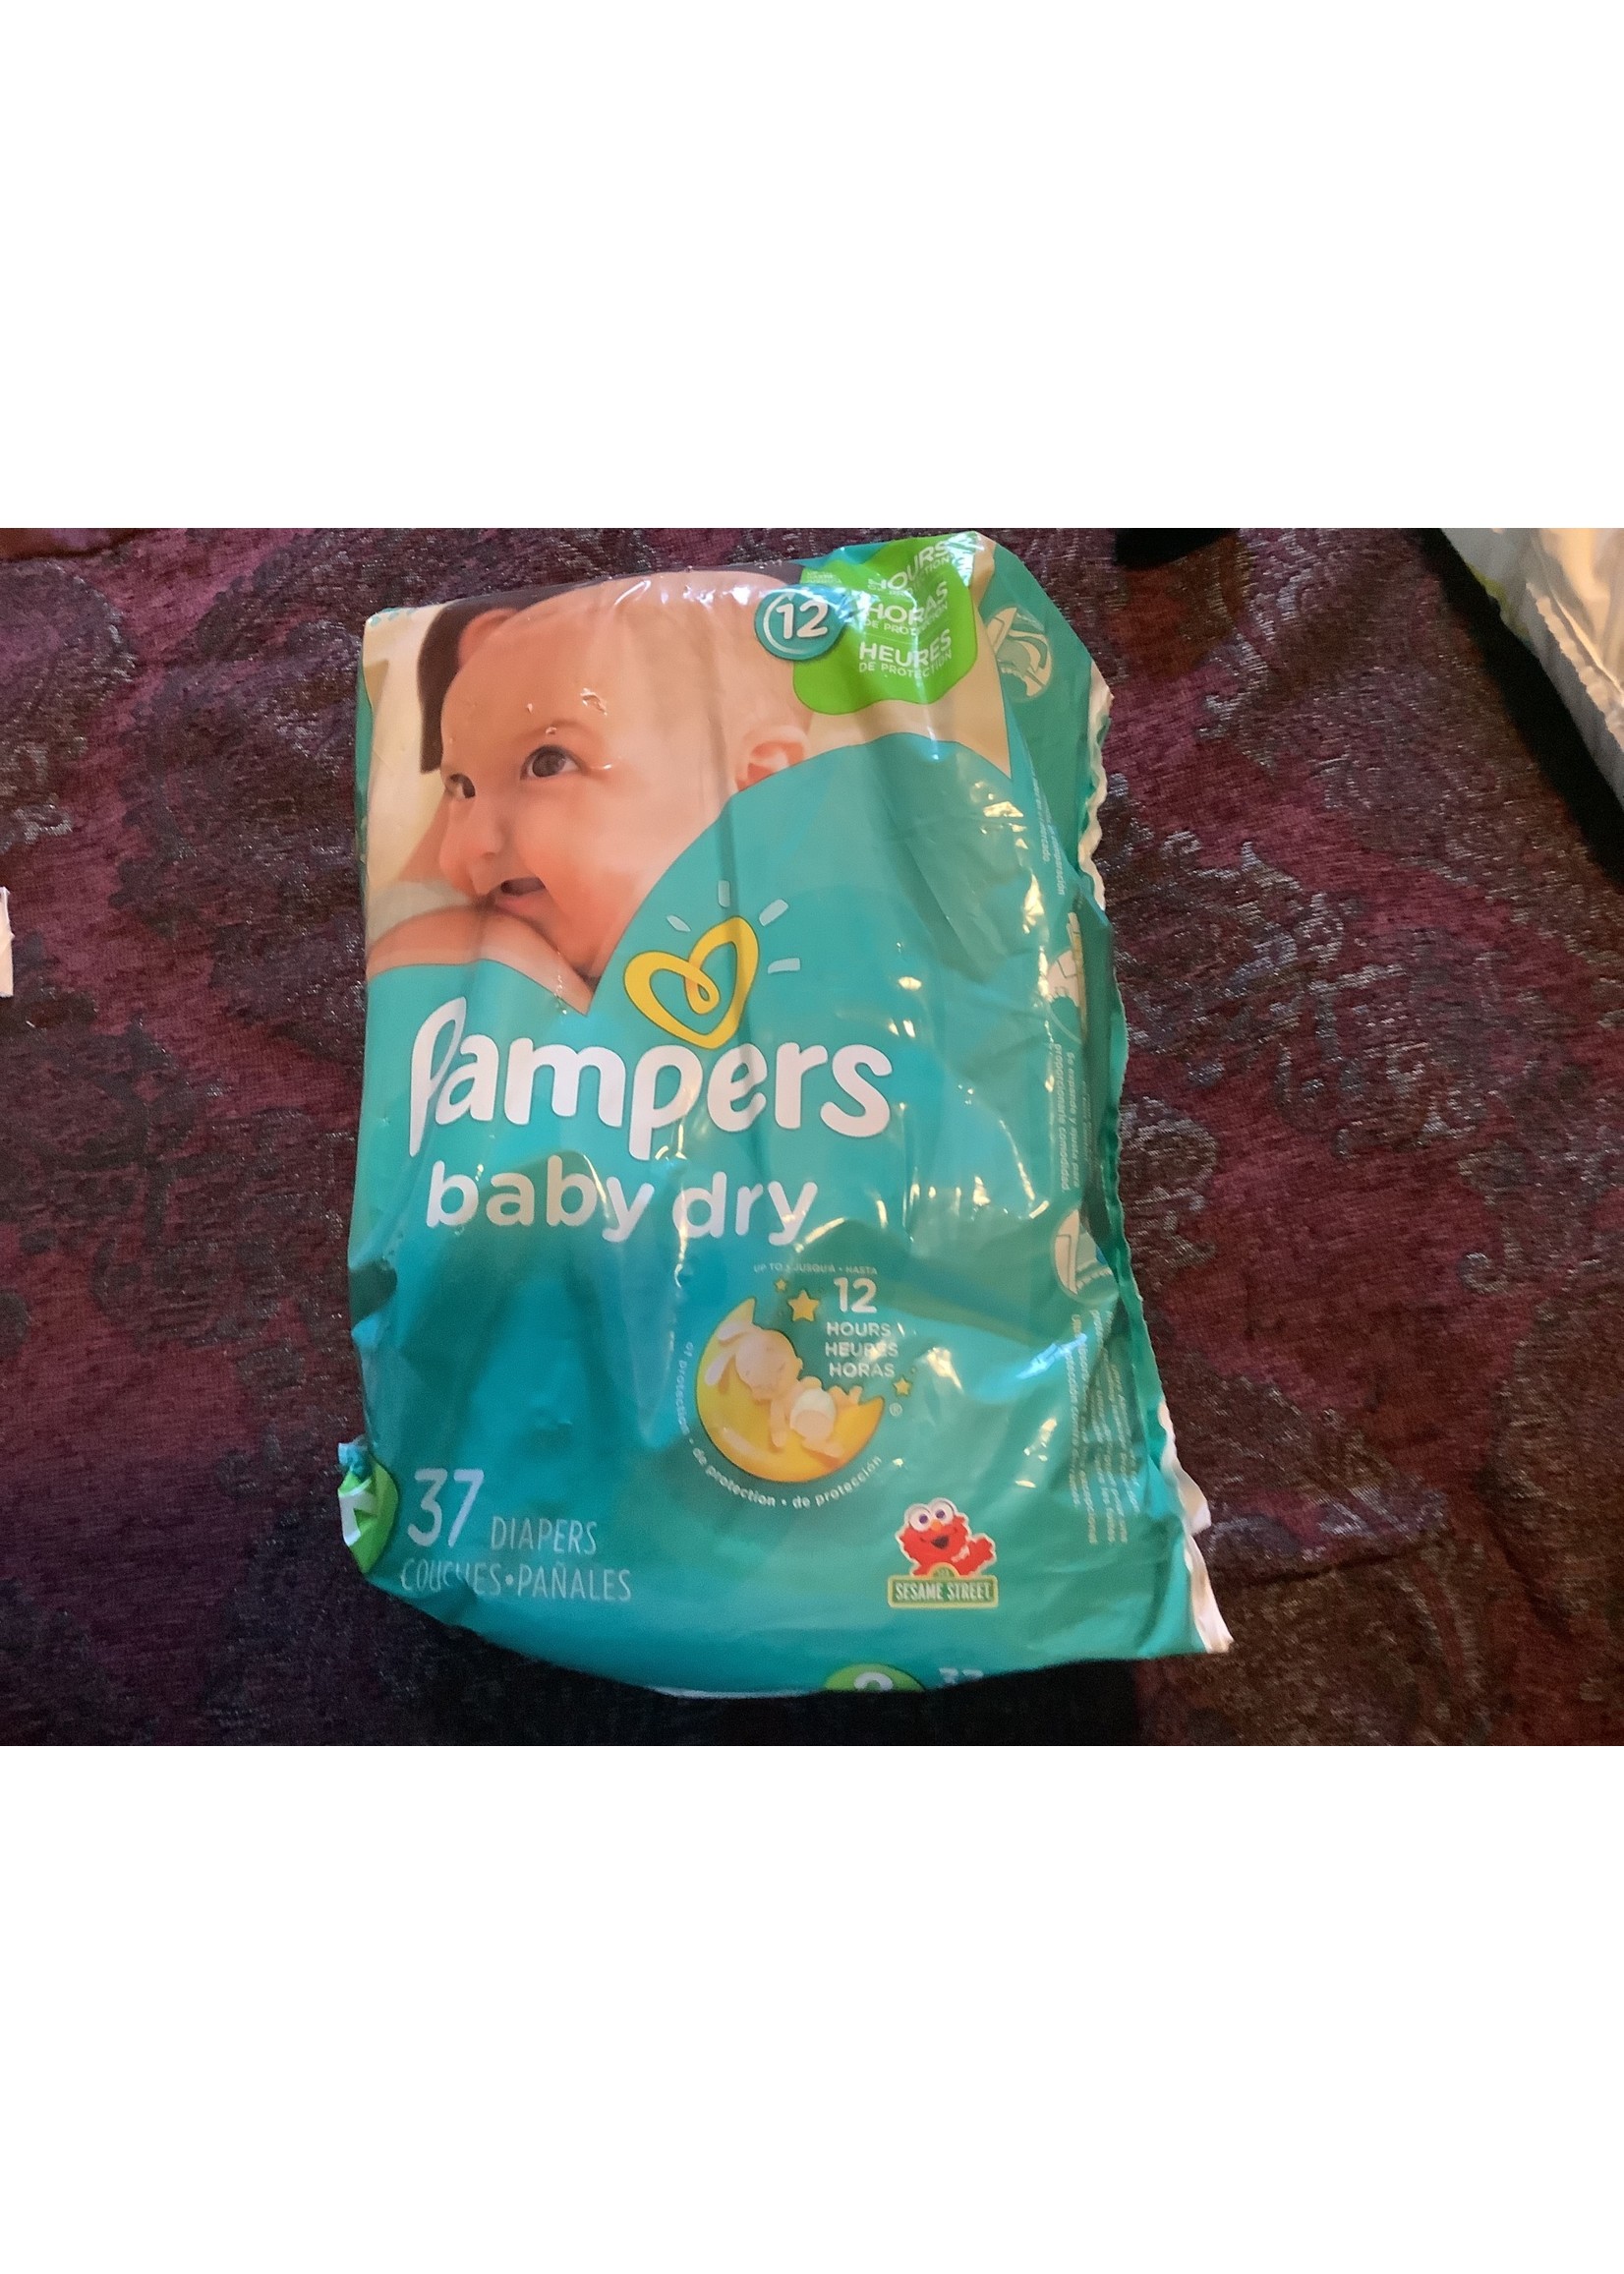 Pampers Baby Dry - 22 Couches - Taille 3